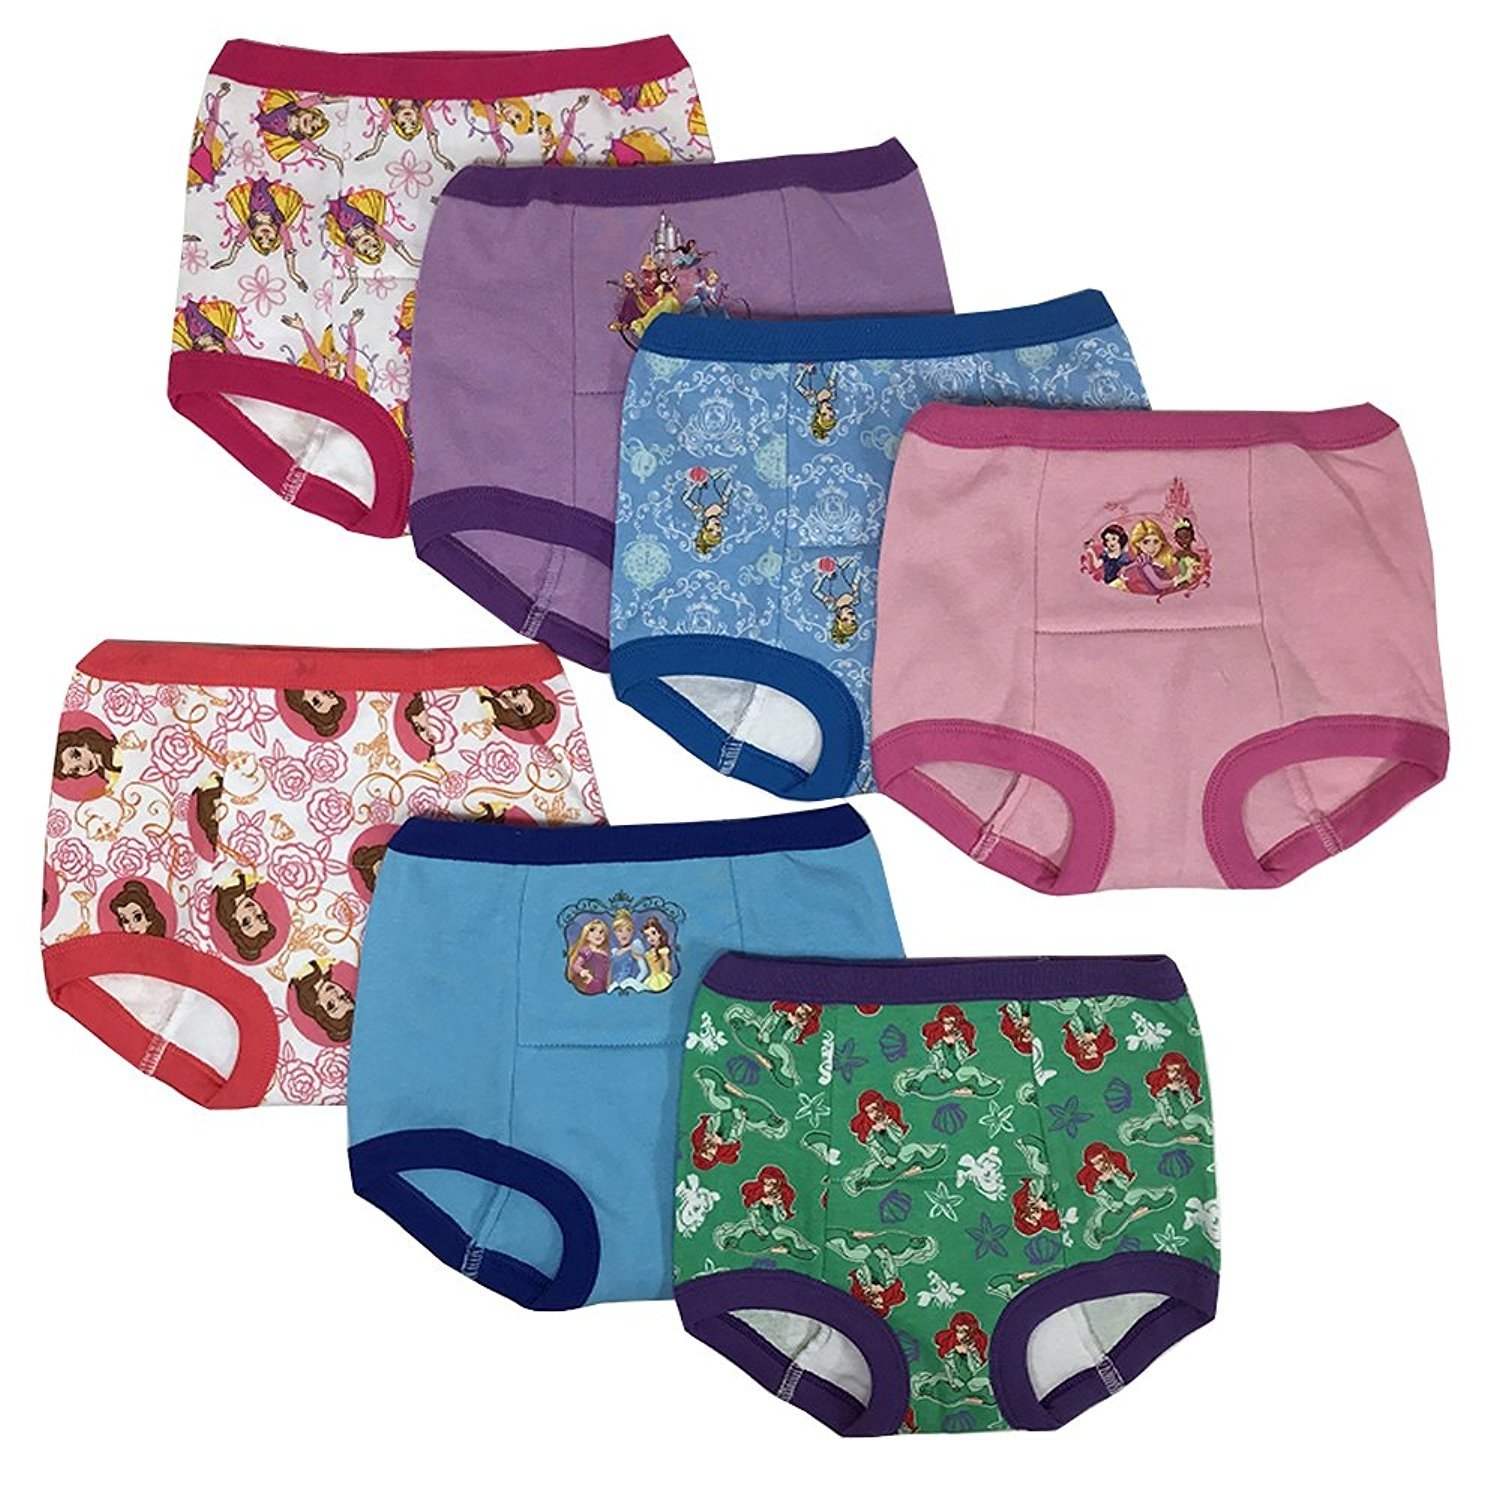 PAW PATROL Boys Potty Training Pants Underwear Toddler 7-Pack Size 2T, 3T,  4T 